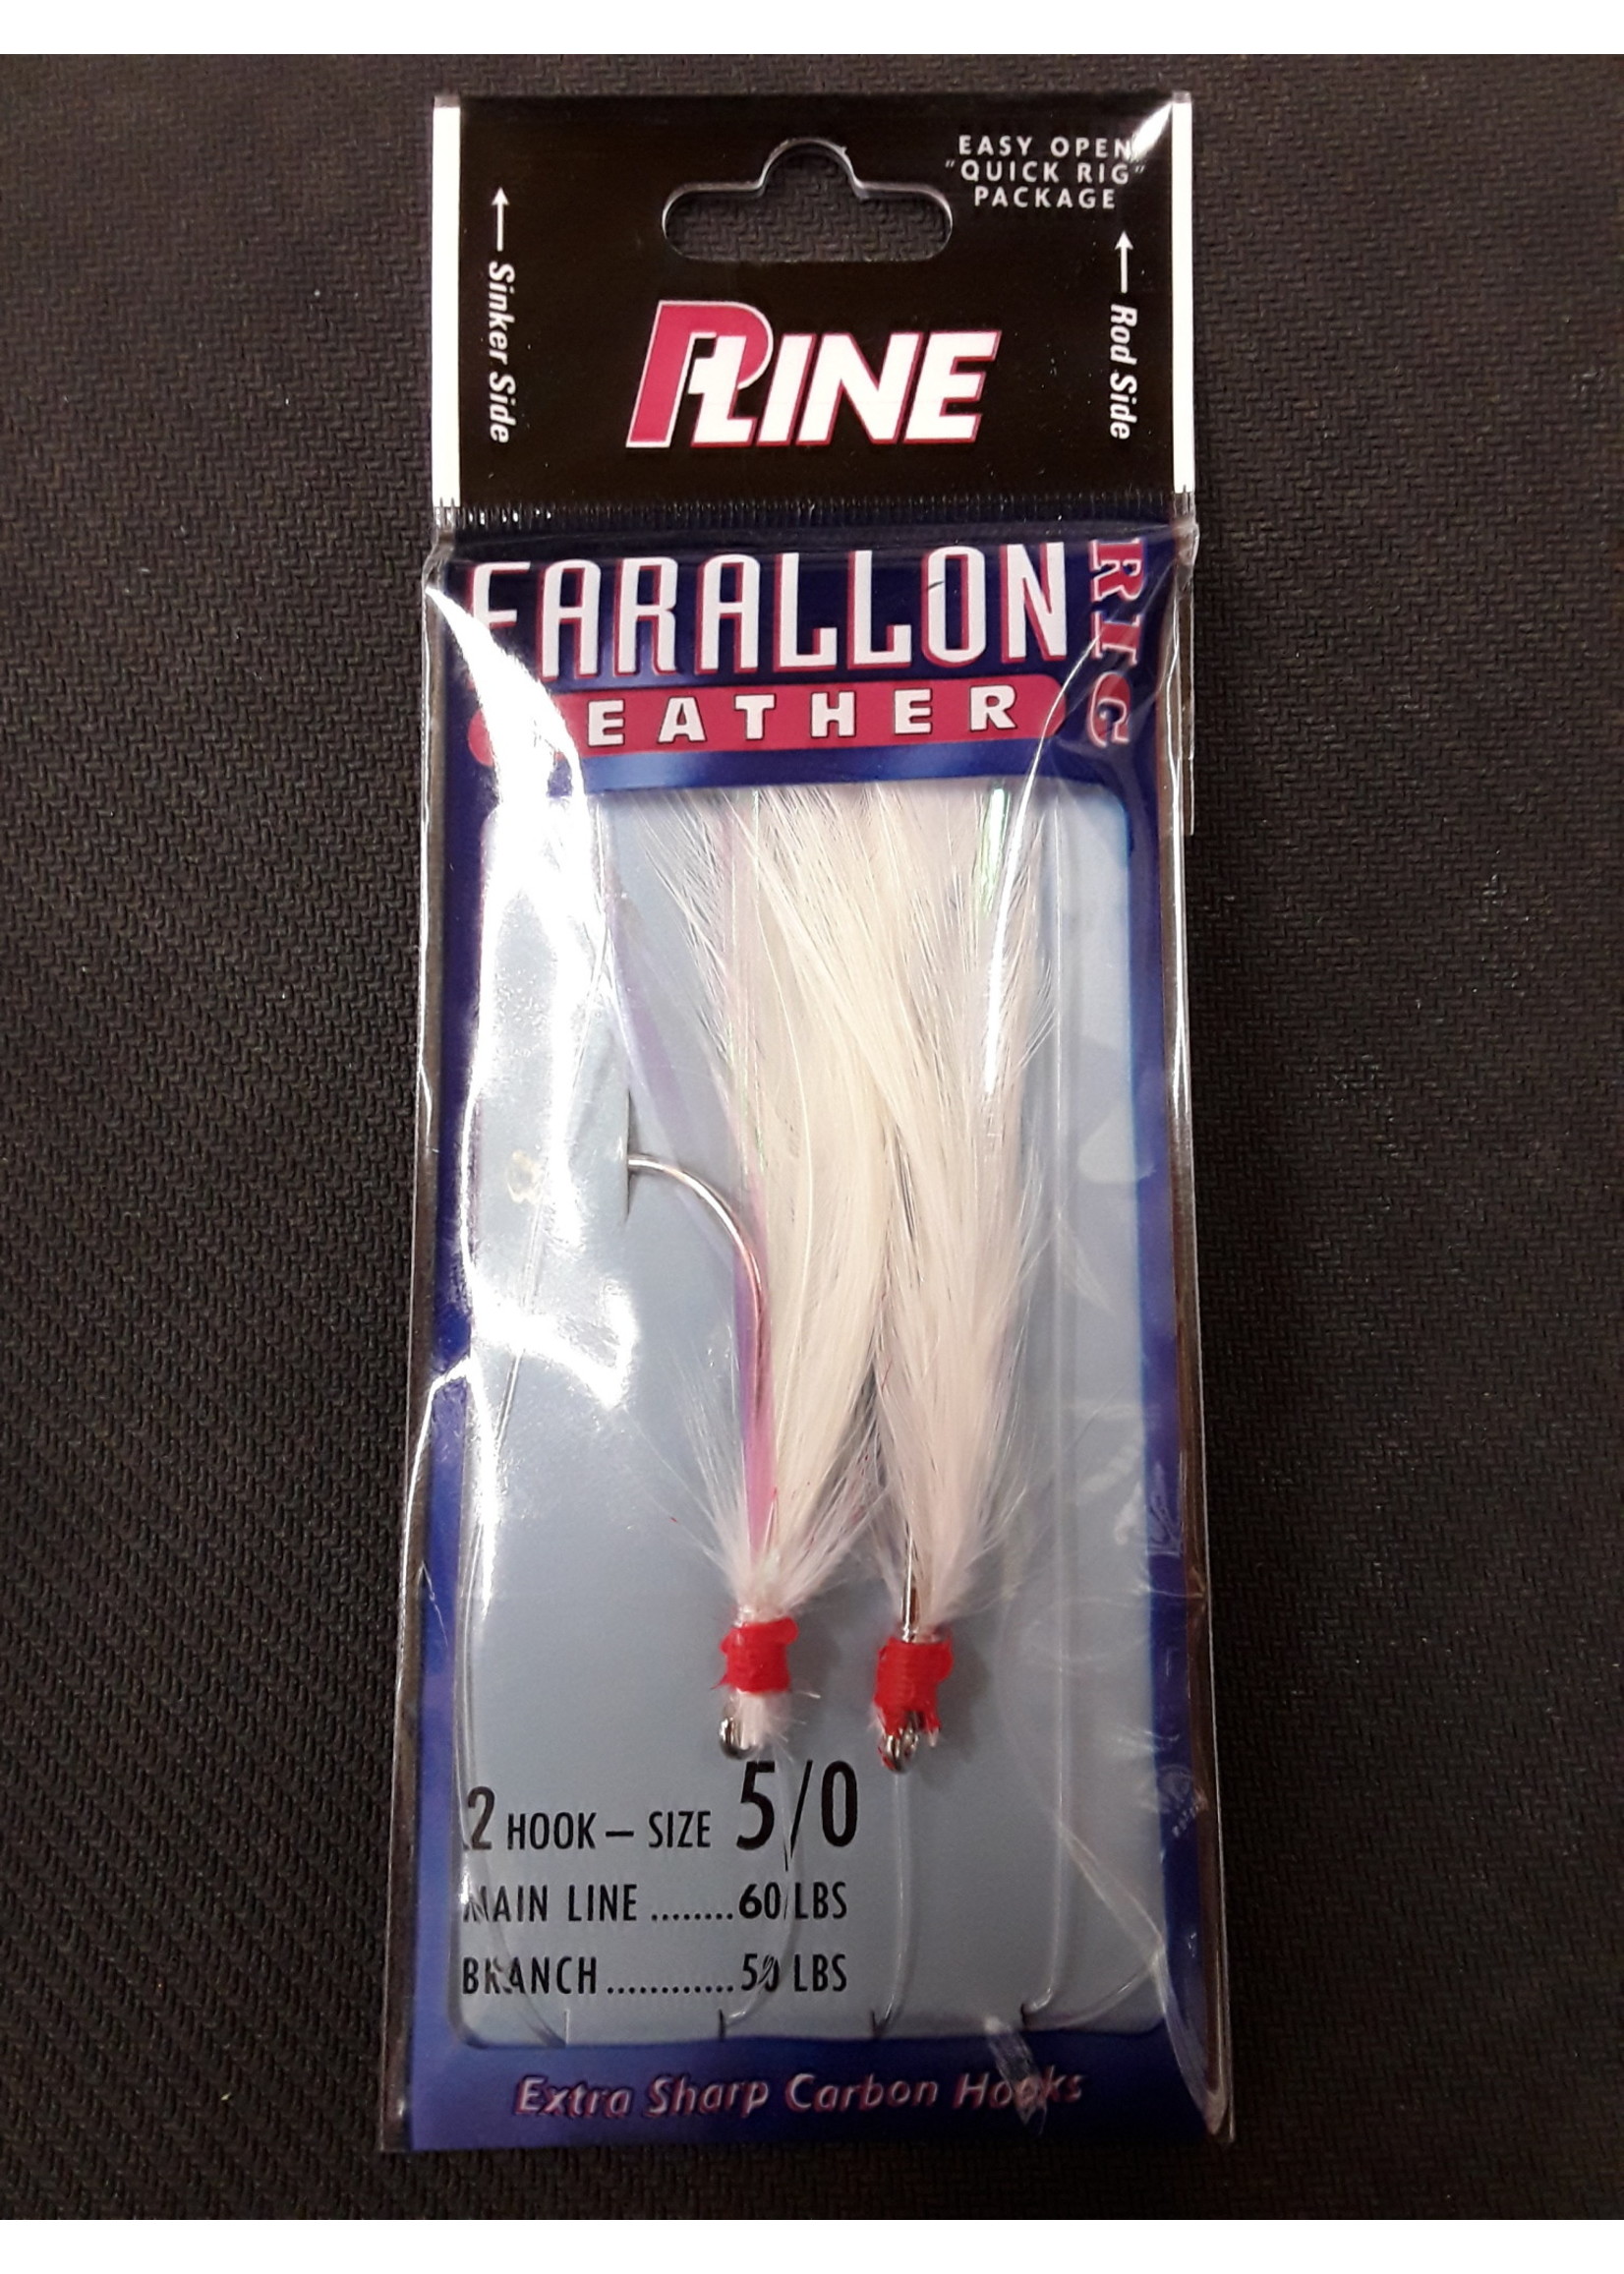 P-LINE P-Line Farallon Feather  5/0  2 Hook Rig